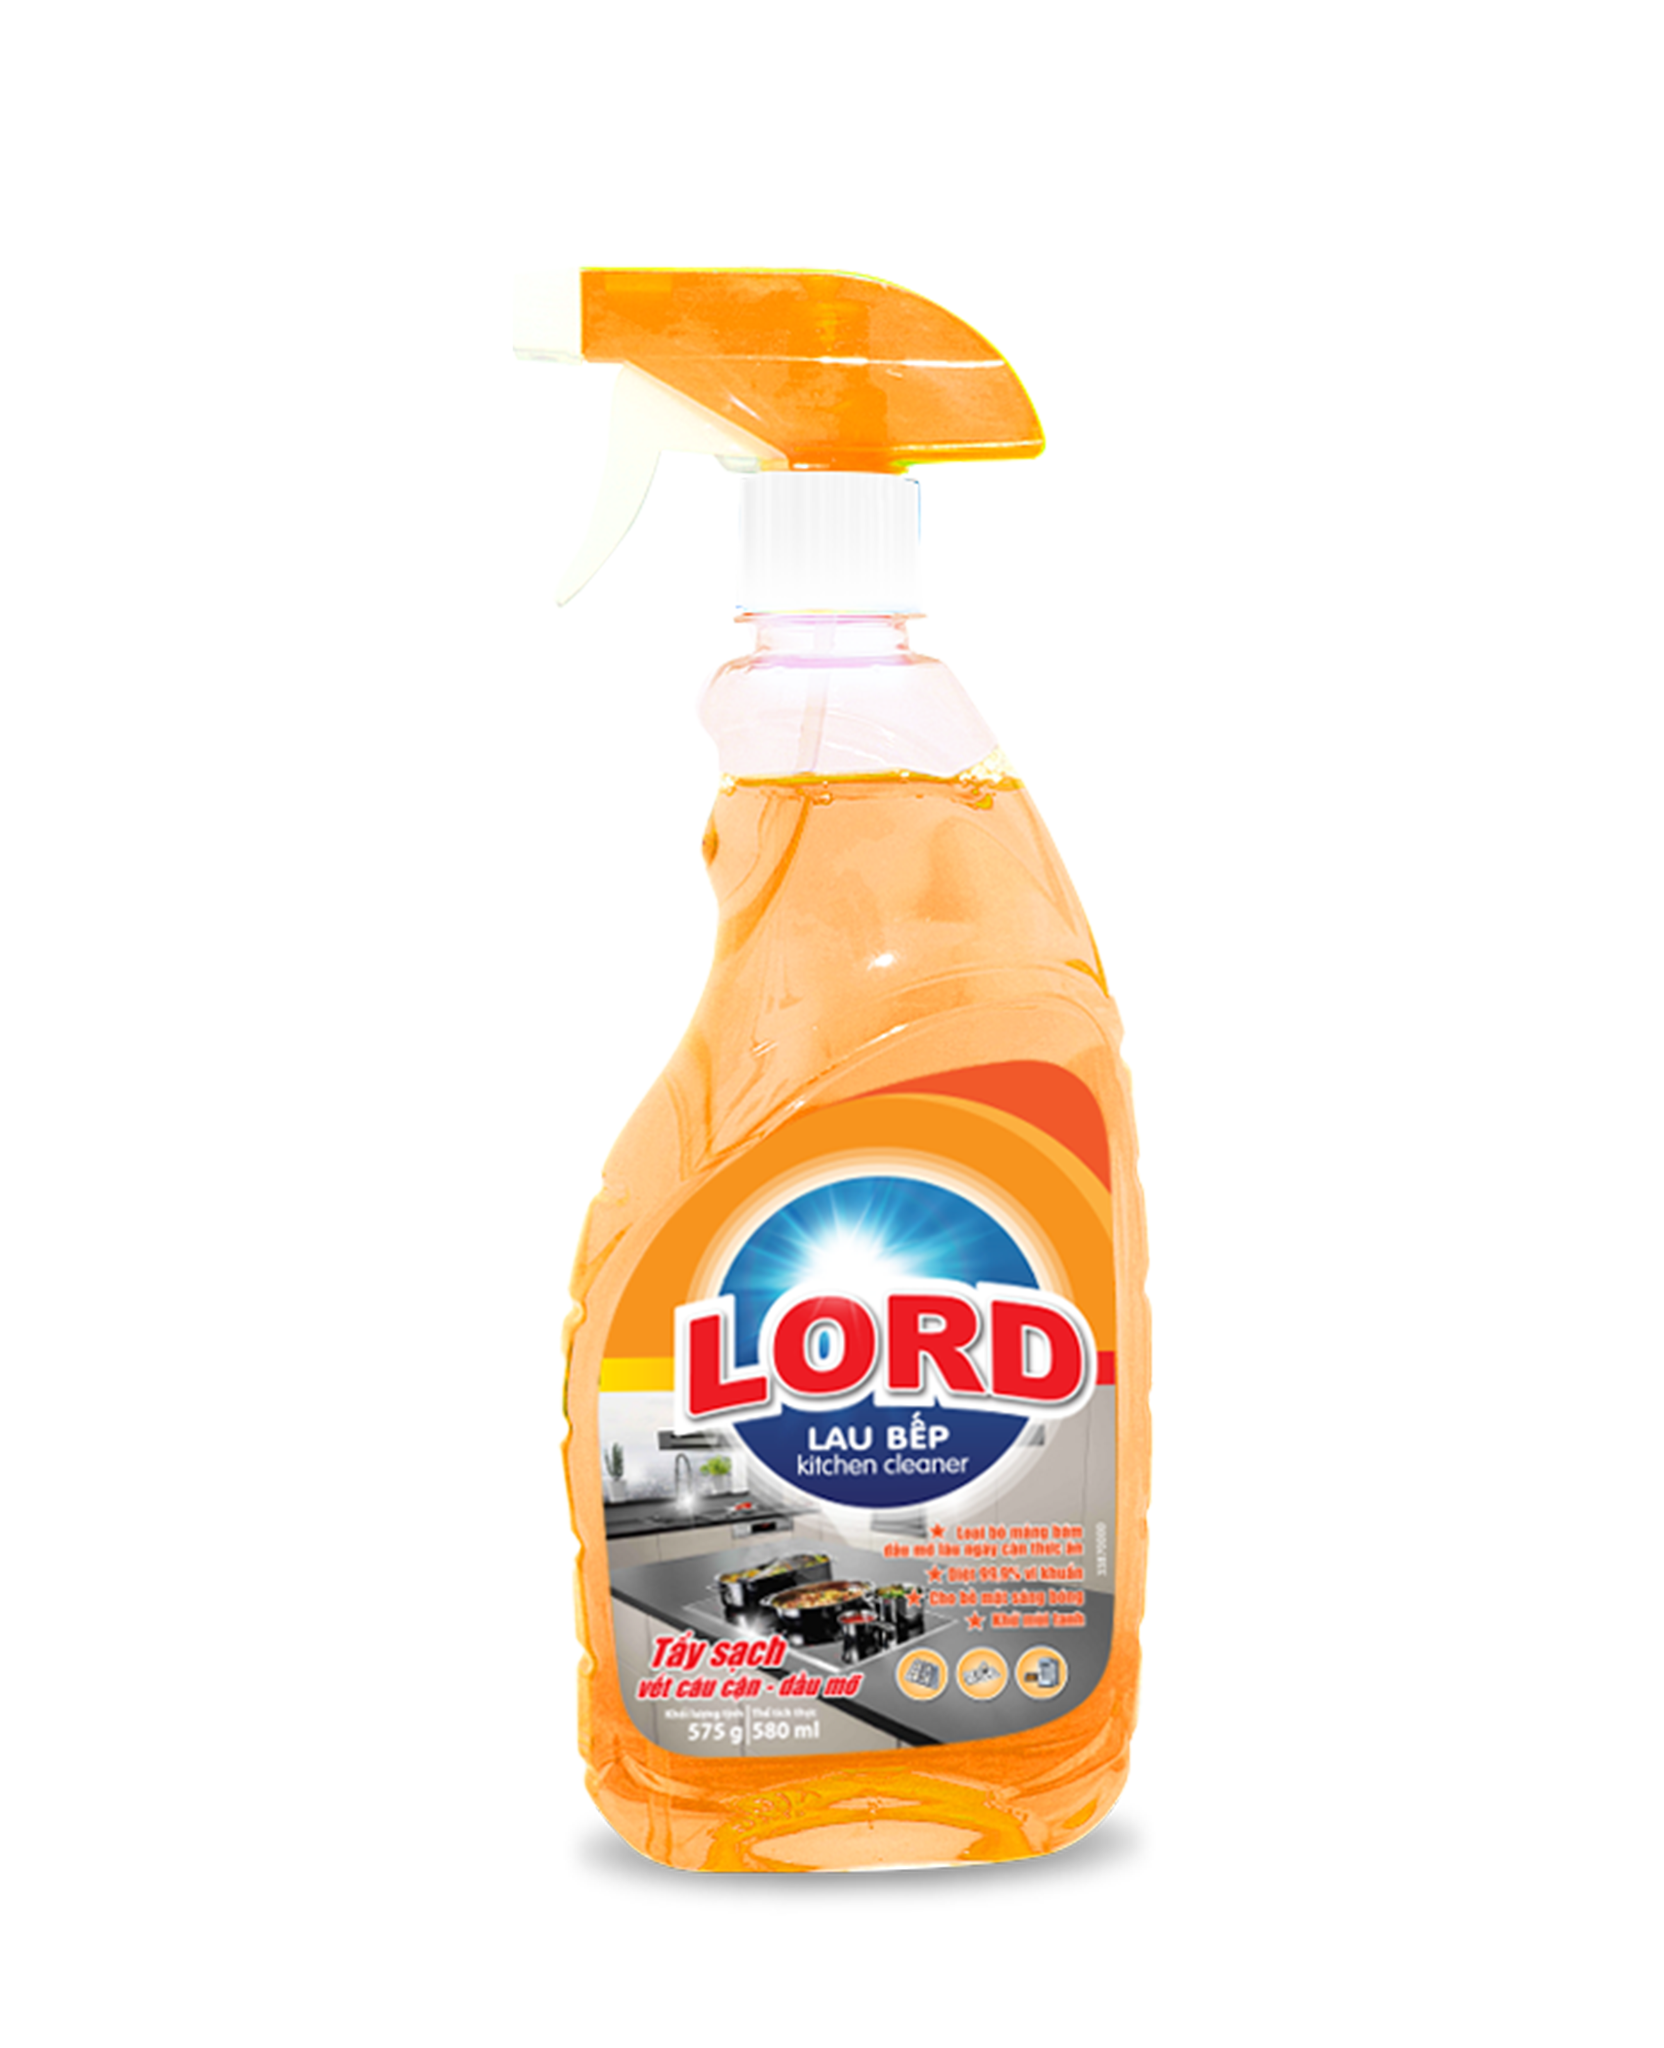 Lord Kitchen Cleaner: The Ultimate Solution for a Spotless Kitchen